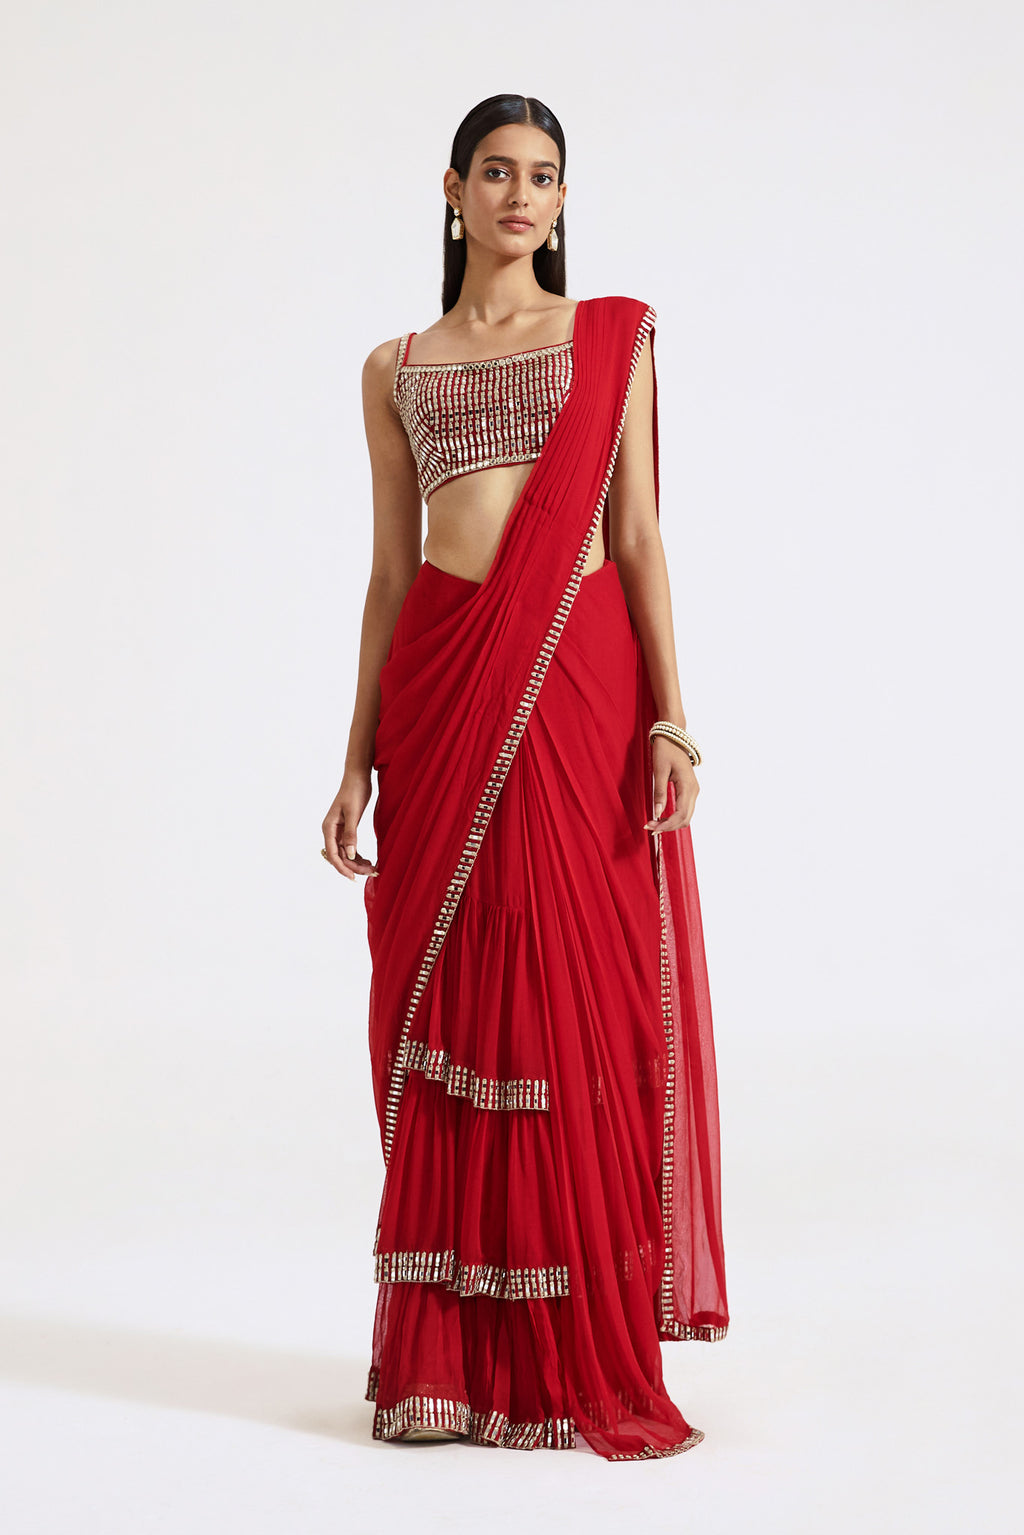 Buy red mirror work georgette pre-draped saree online in USA with embroidered blouse. Look your best at parties and weddings in beautiful designer sarees, embroidered sarees, handwoven sarees, silk sarees, organza saris from Pure Elegance Indian saree store in USA.-full view